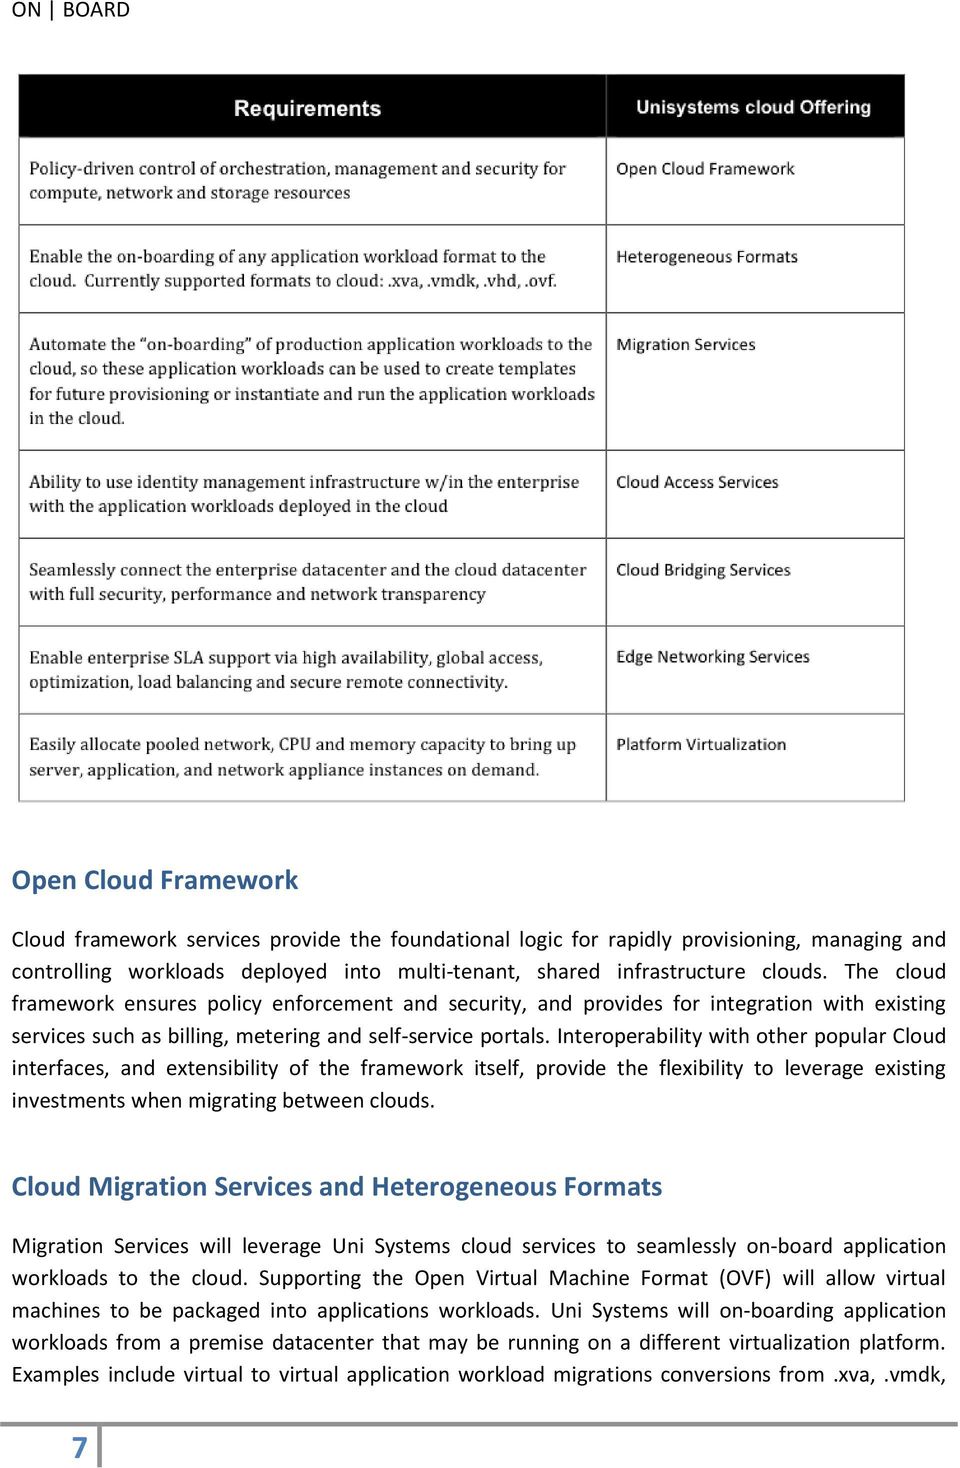 Interoperability with other popular Cloud interfaces, and extensibility of the framework itself, provide the flexibility to leverage existing investments when migrating between clouds.